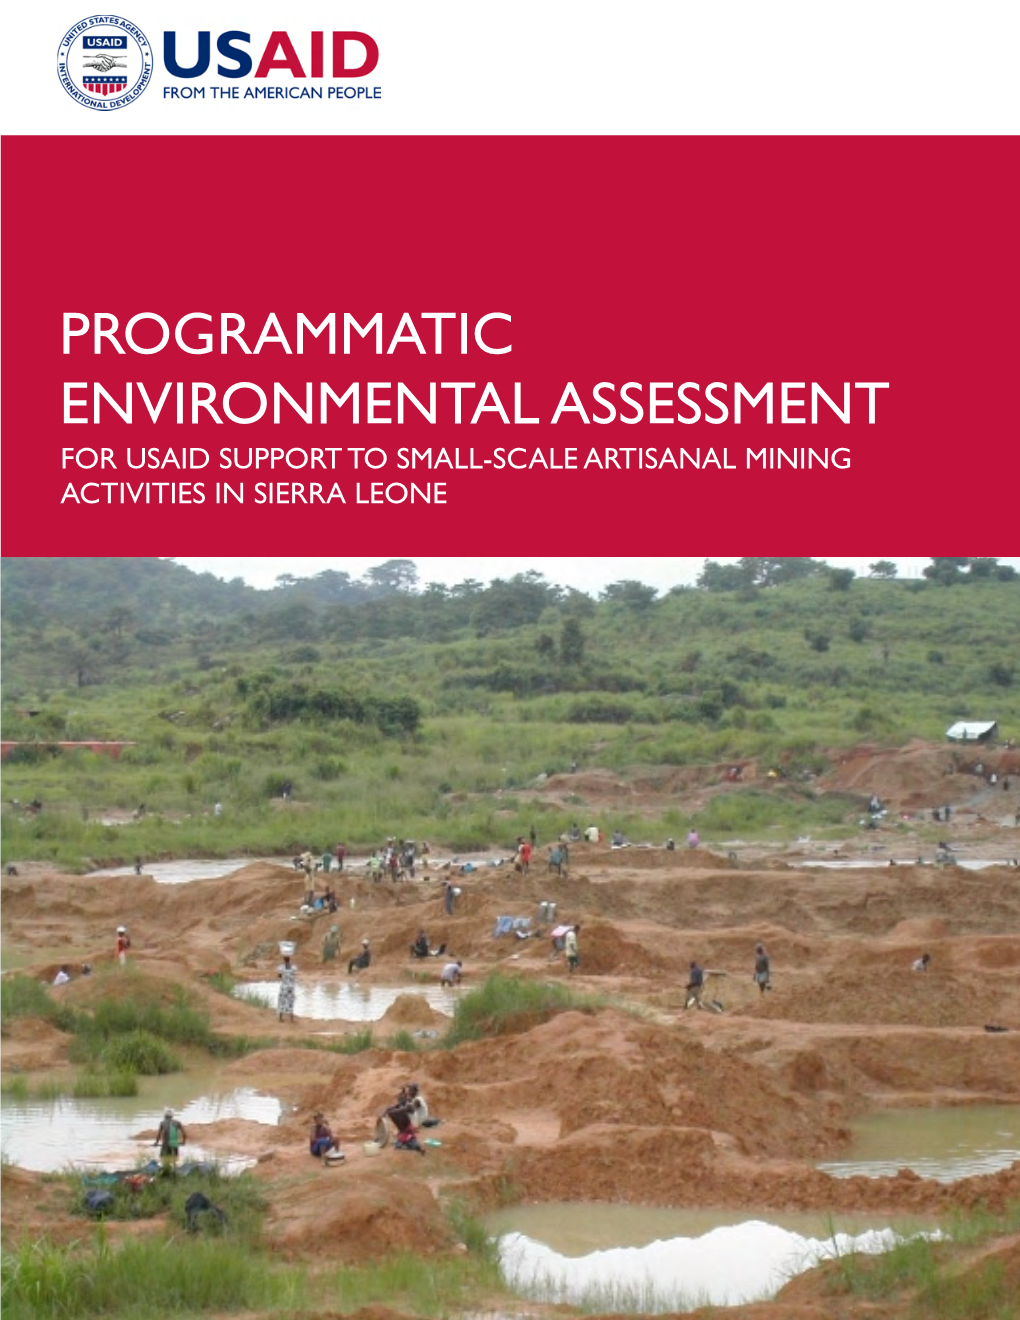 Programmatic Environmental Assessment for Usaid Support to Small-Scale Artisanal Mining Activities in Sierra Leone